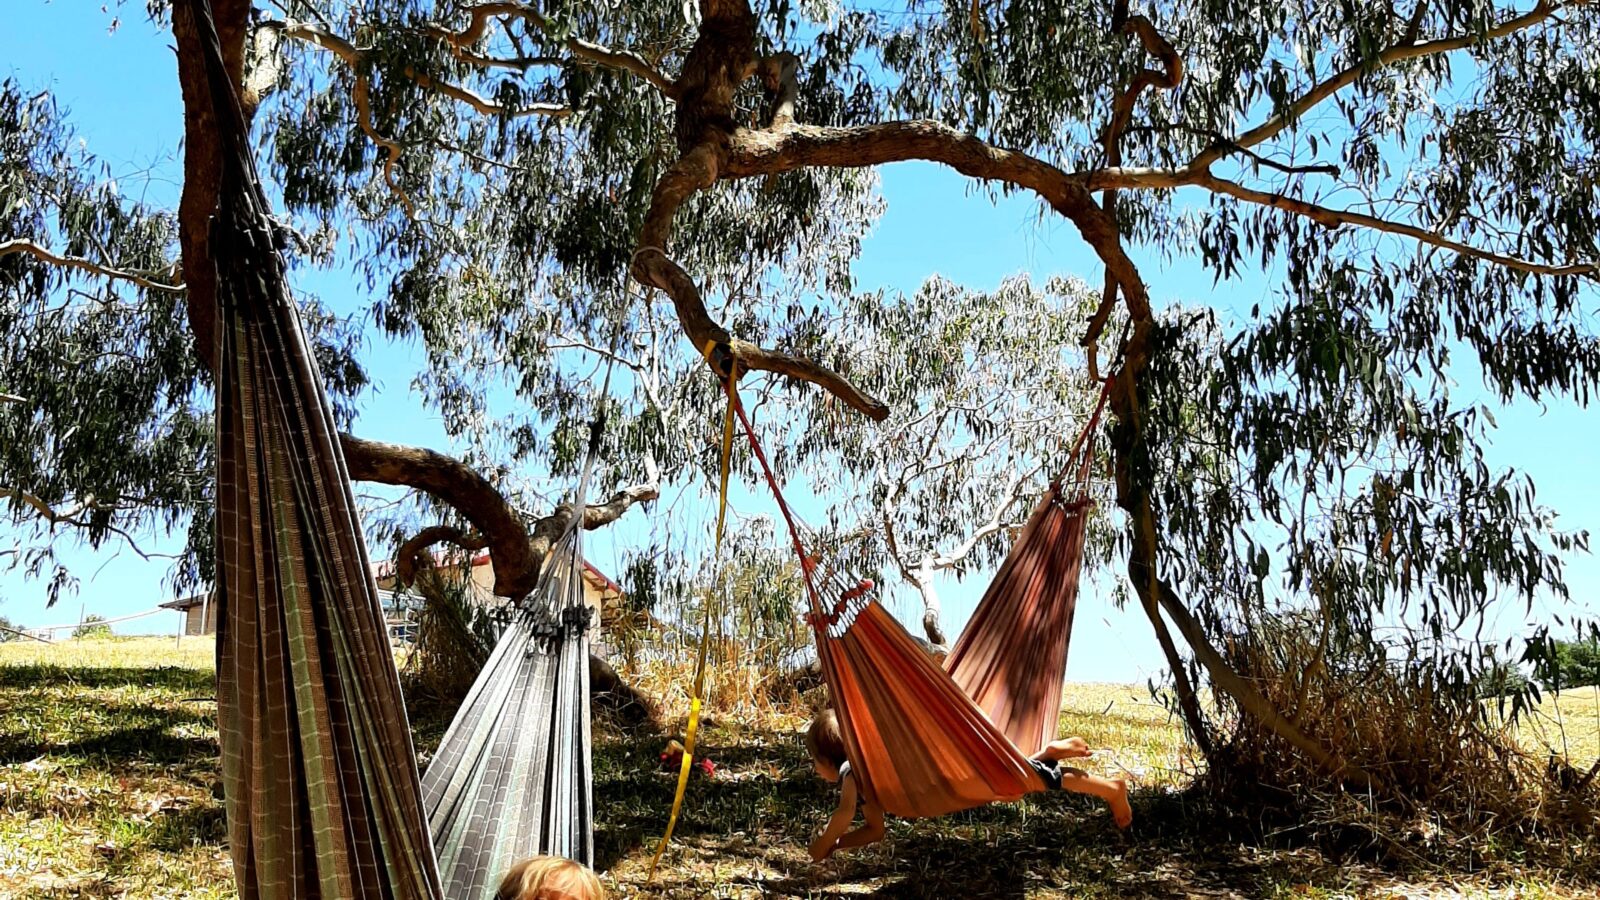 Time to relax... bring your hammock if you have one or two or three. The huge apple box tree provides a perfect spot to chill in the shade.